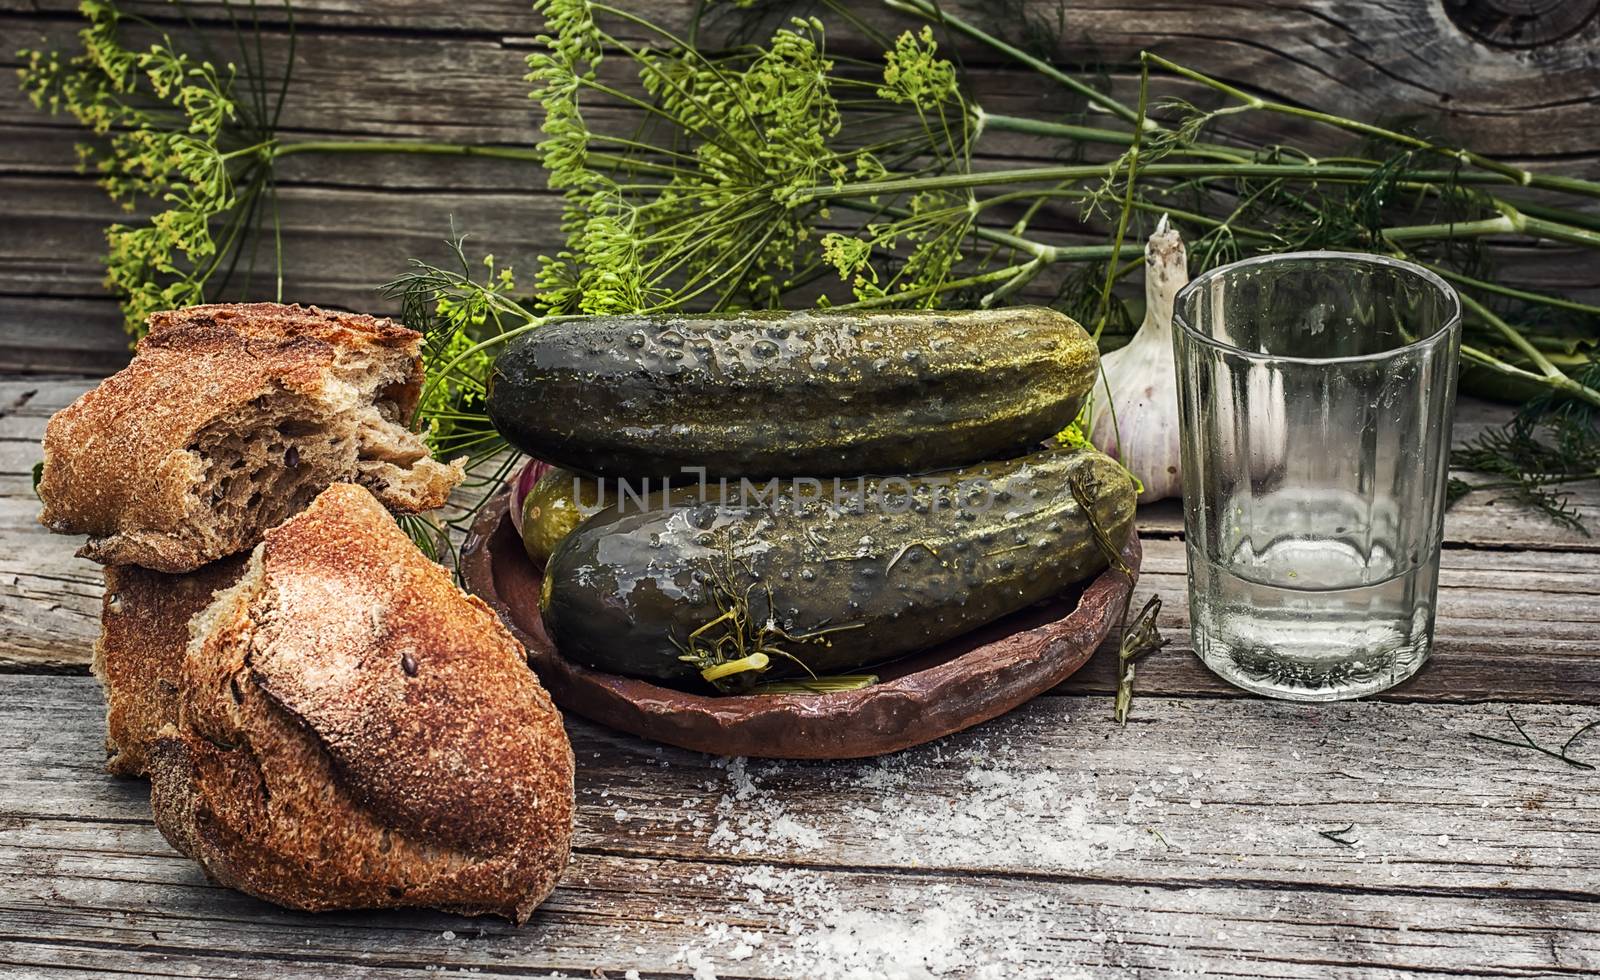 Pickled cucumbers with dill and vodka shot glass on wooden background in country style.Photo tinted.Selective focus